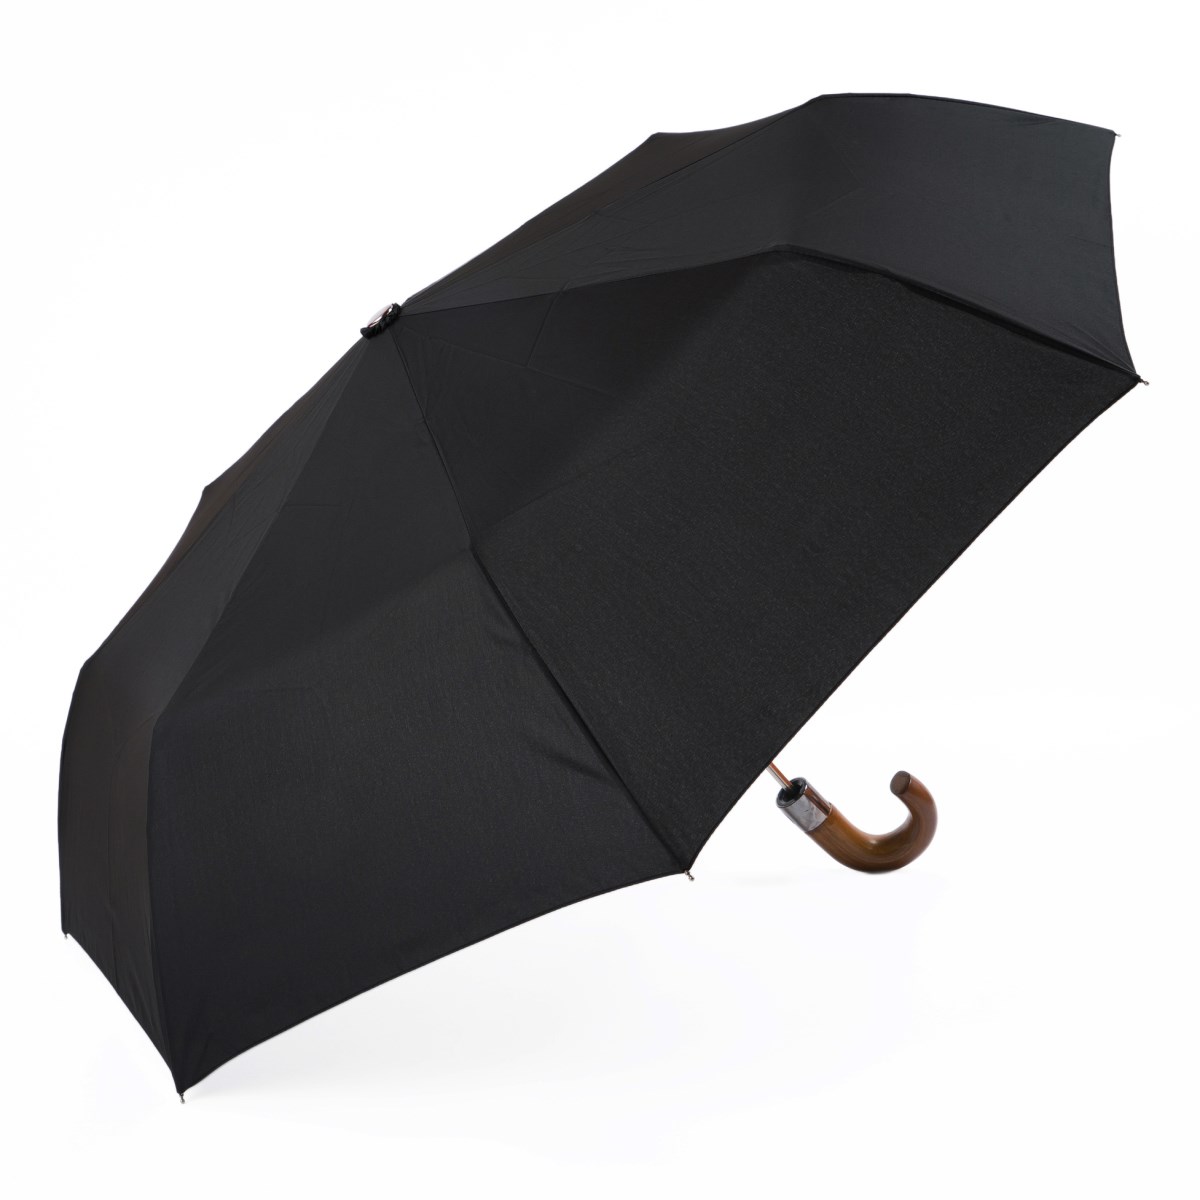 Black Wood Handle Umbrella for Men and Women Automatic Open and Close 